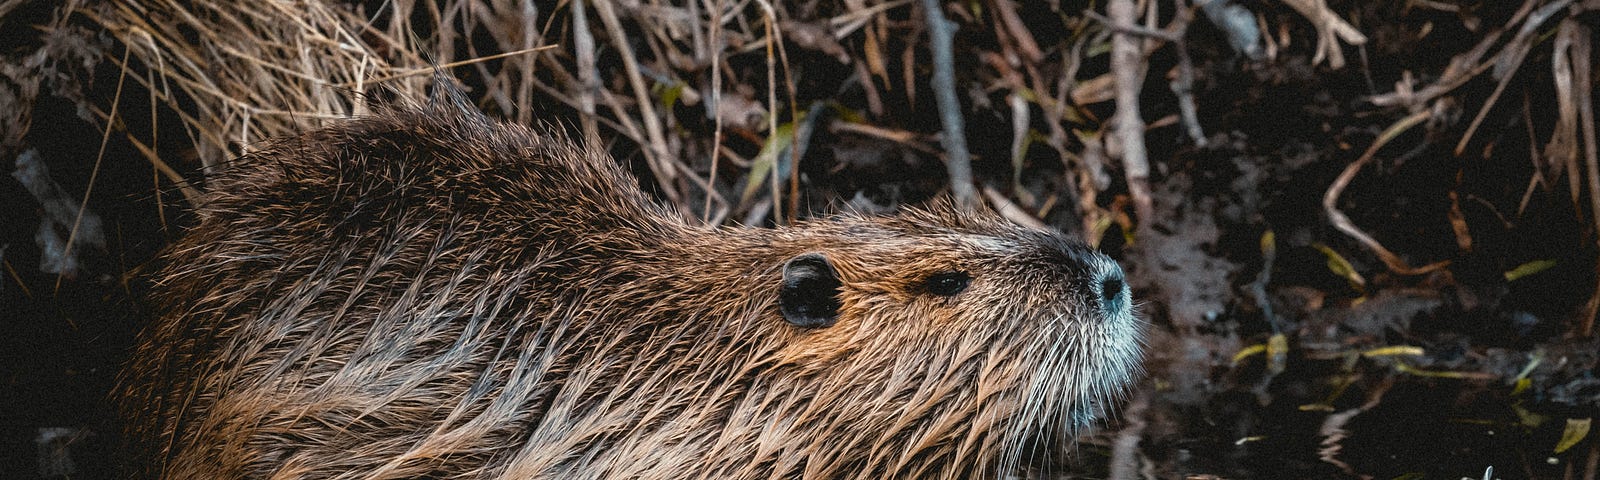 A beaver stands in shallow water with its dam behind it.